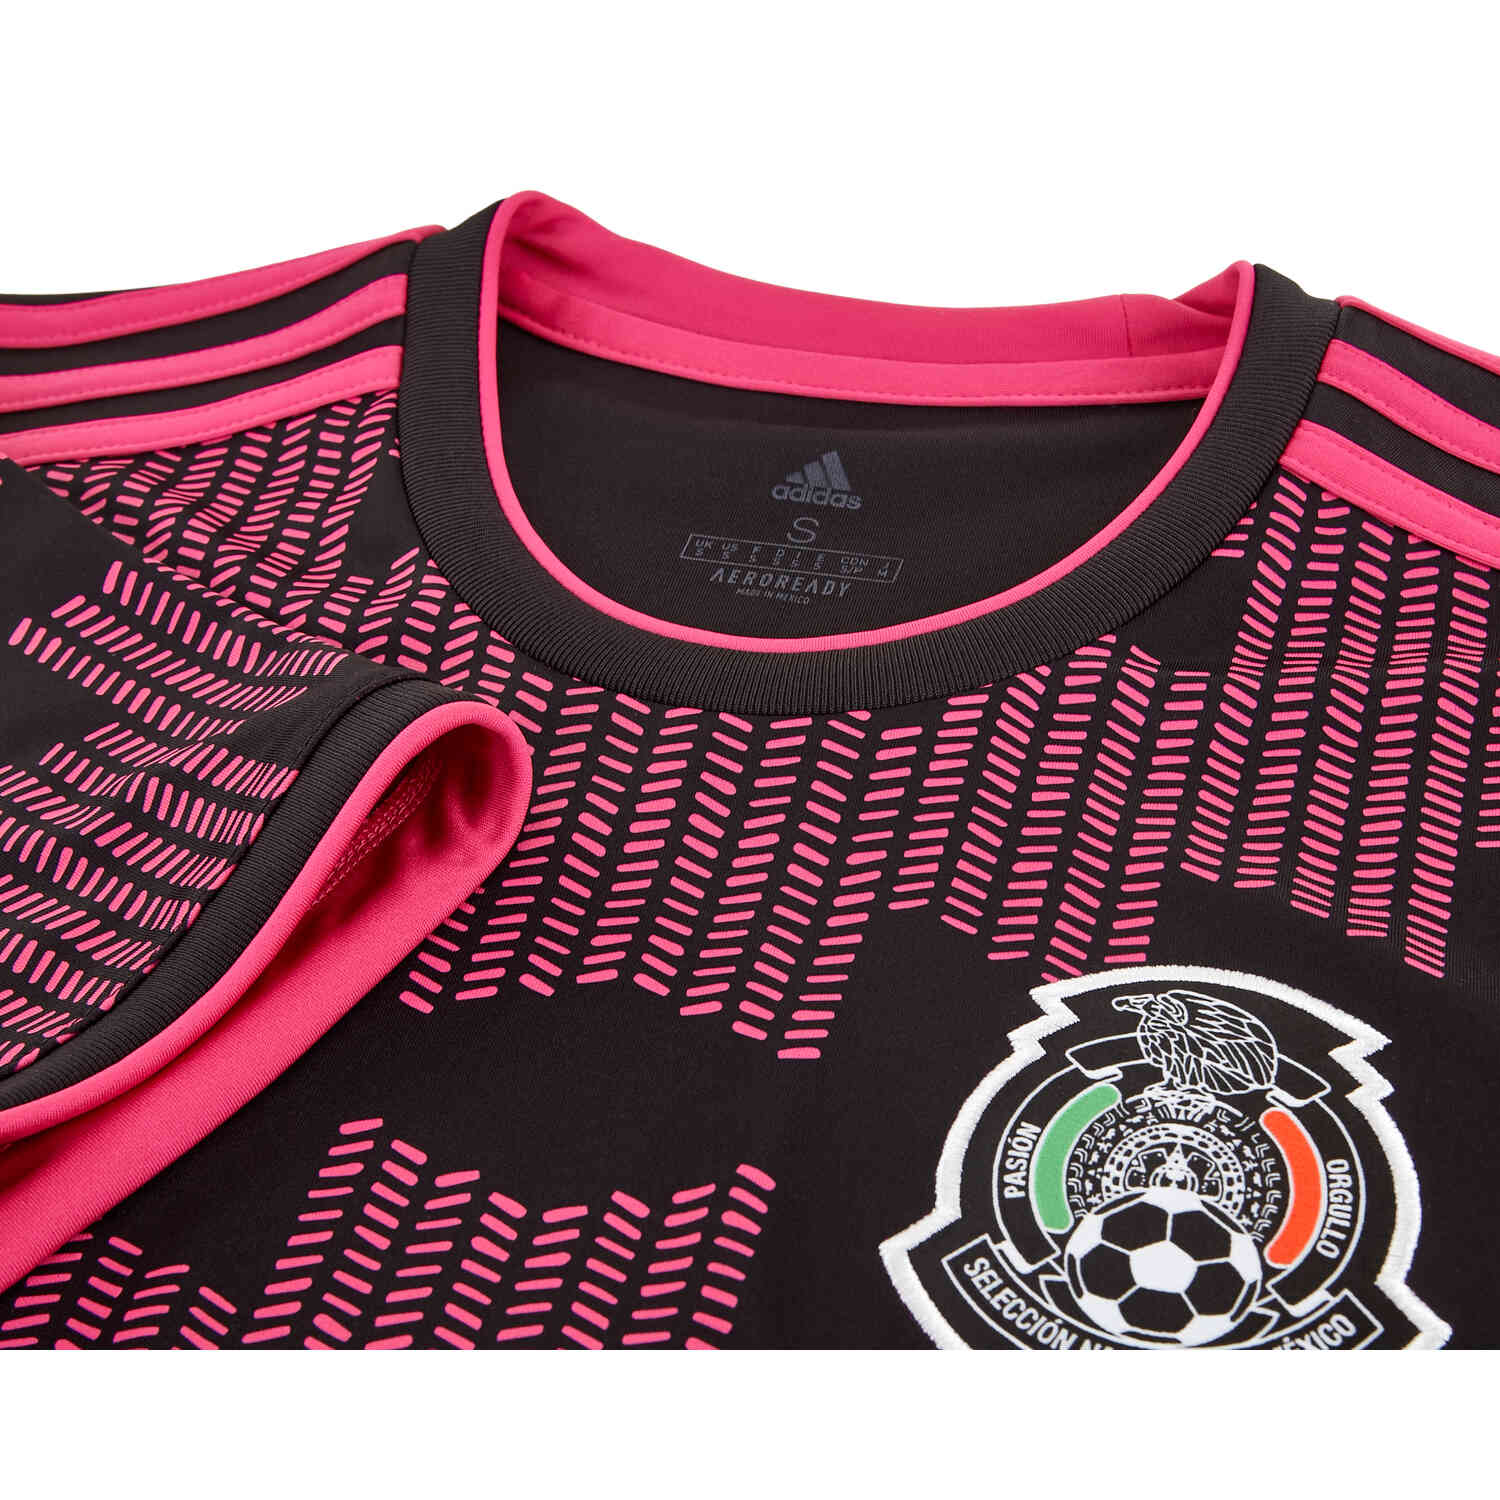 Kids Jersey Mexico Black new Season Customize Available any name and number. 